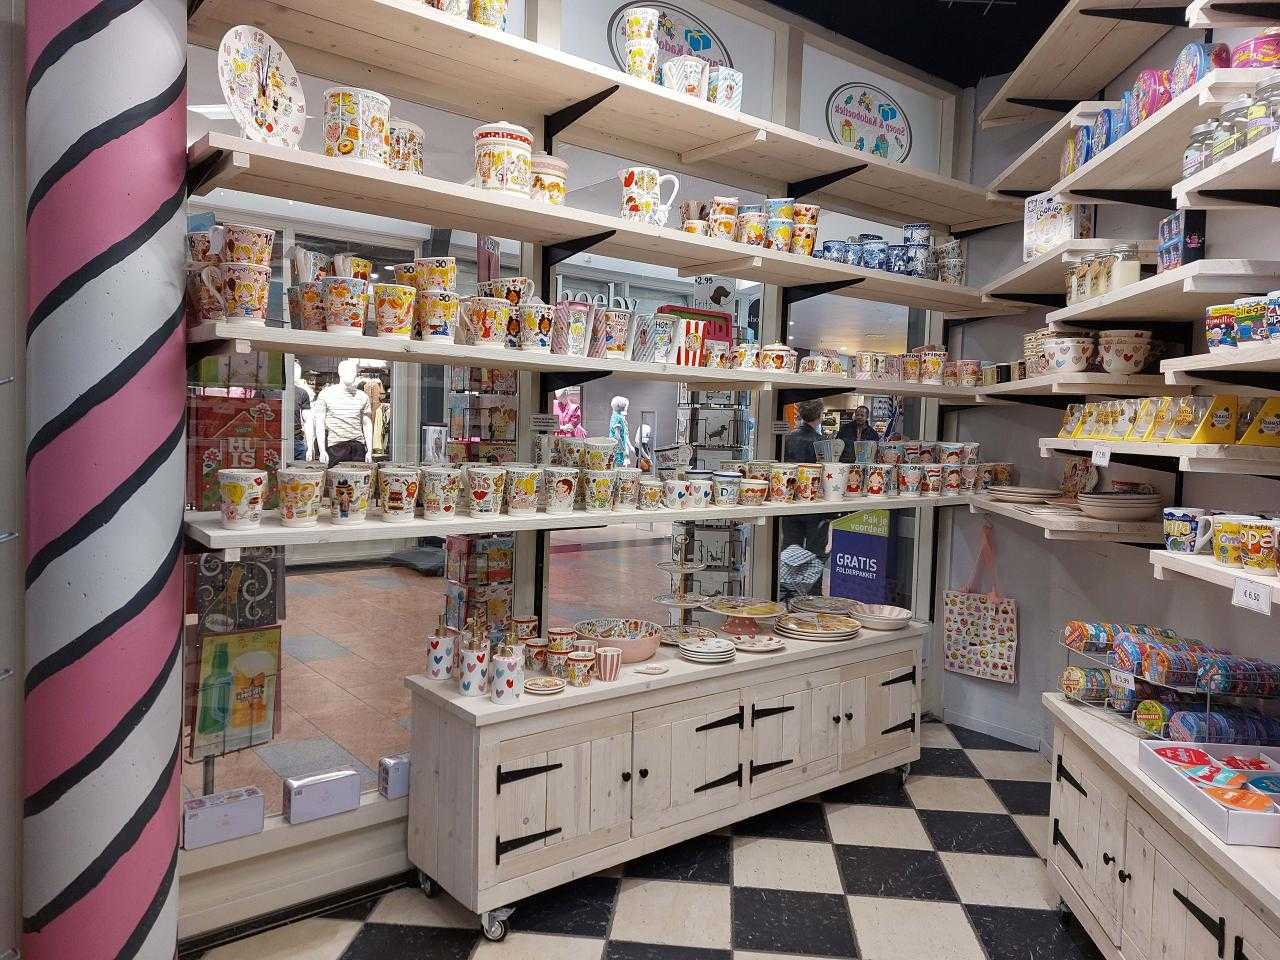 Candy shop with checkered floor and lots of mugs